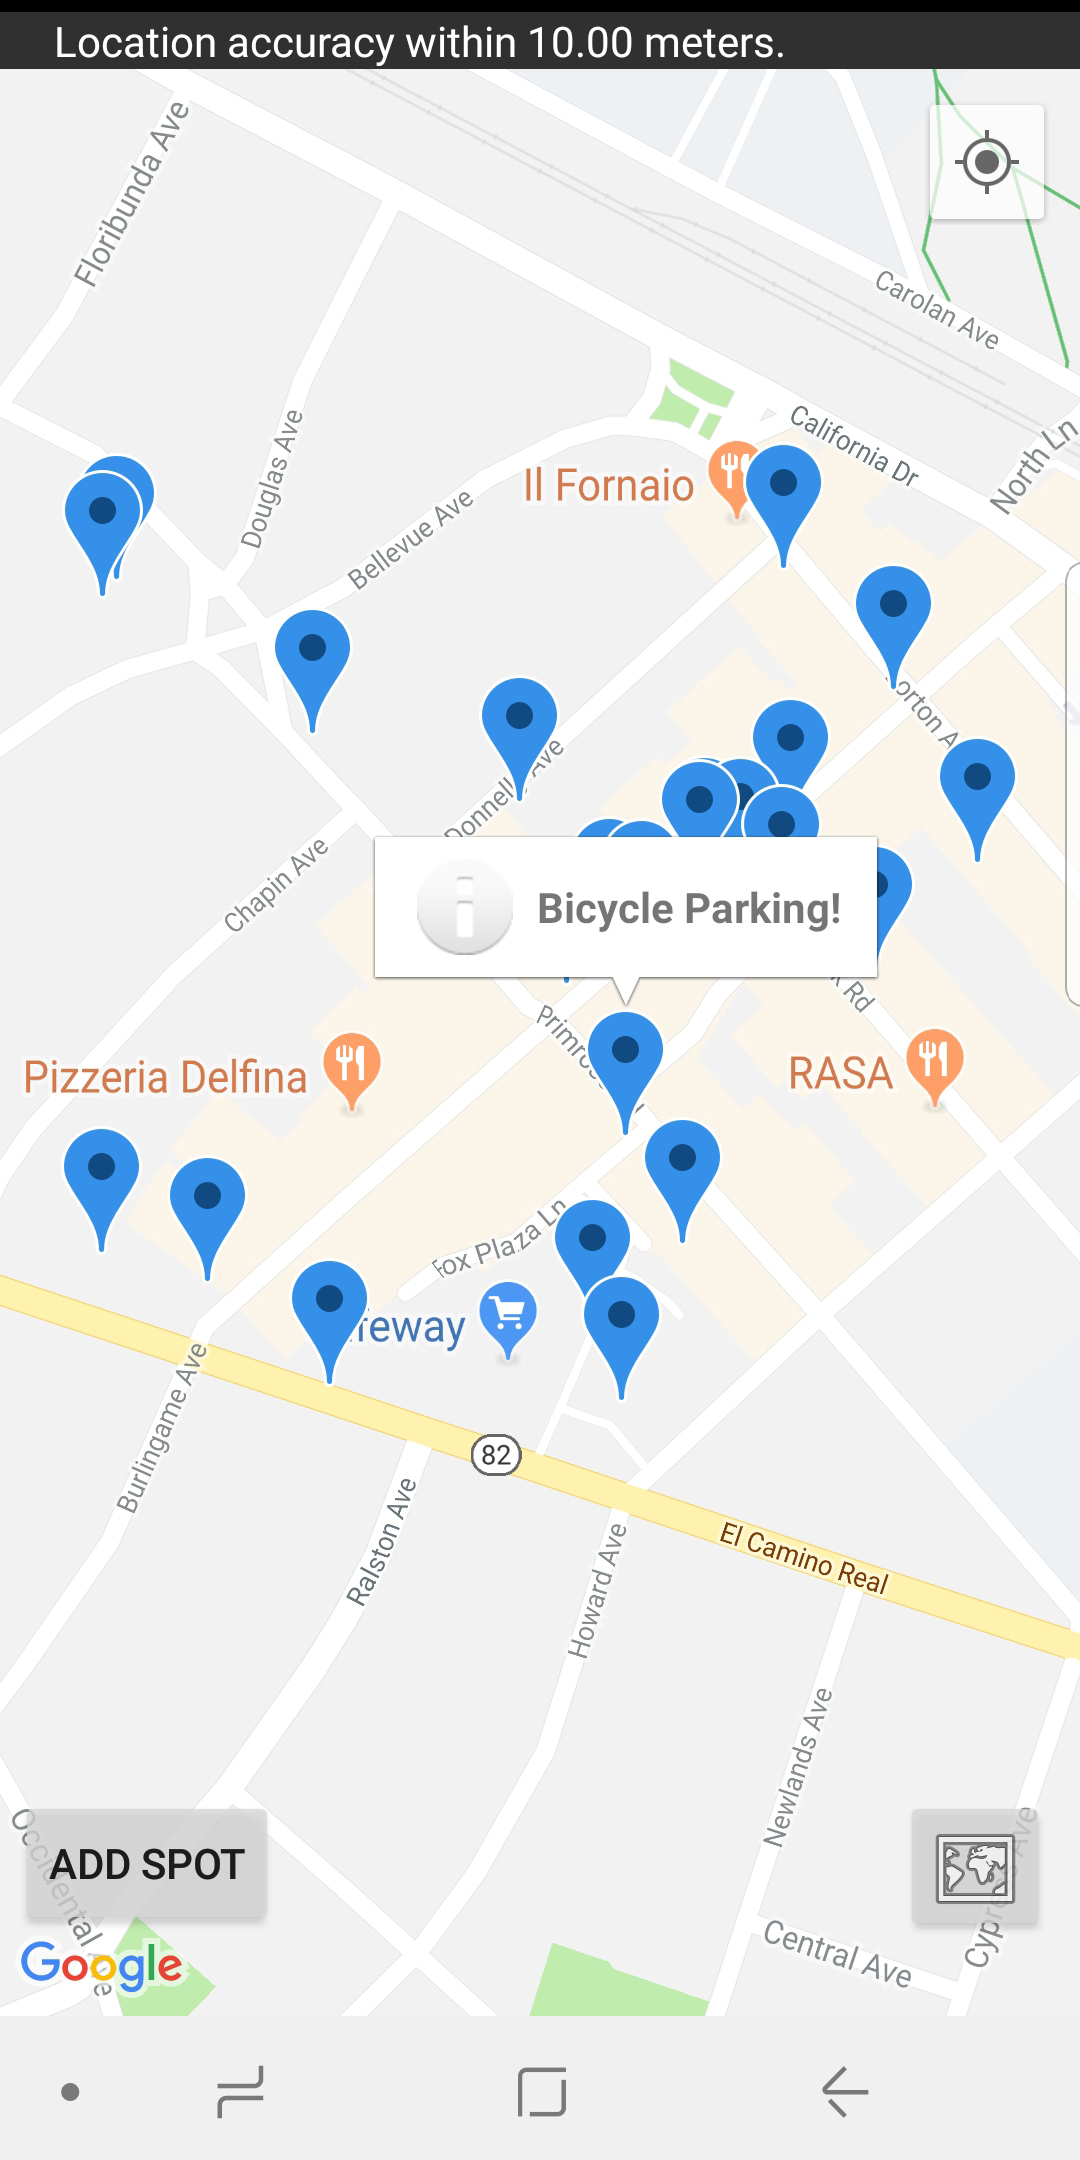 Find bicycle parking